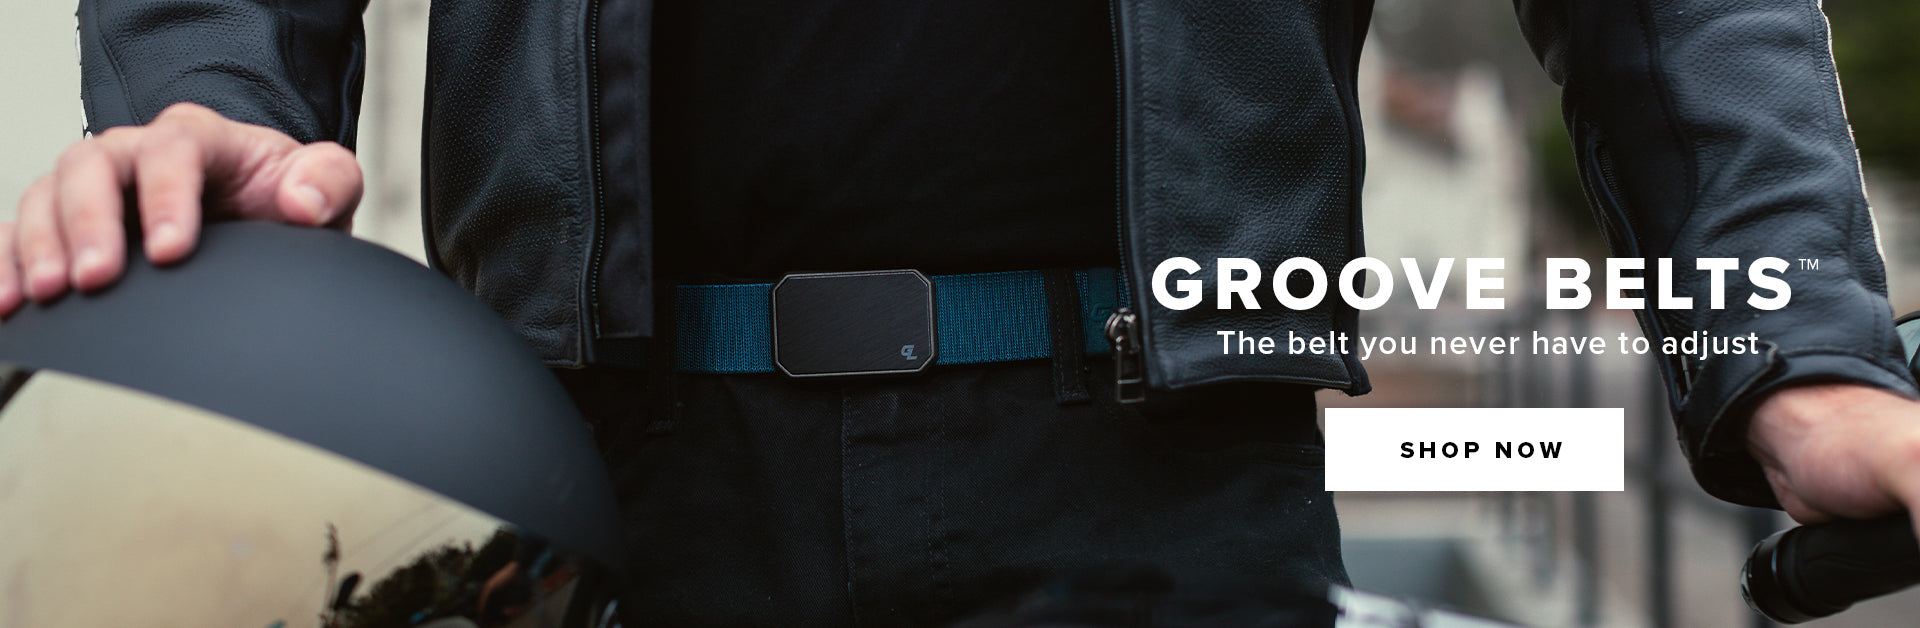 Groove Belts the belt you never have to adjust- shop now